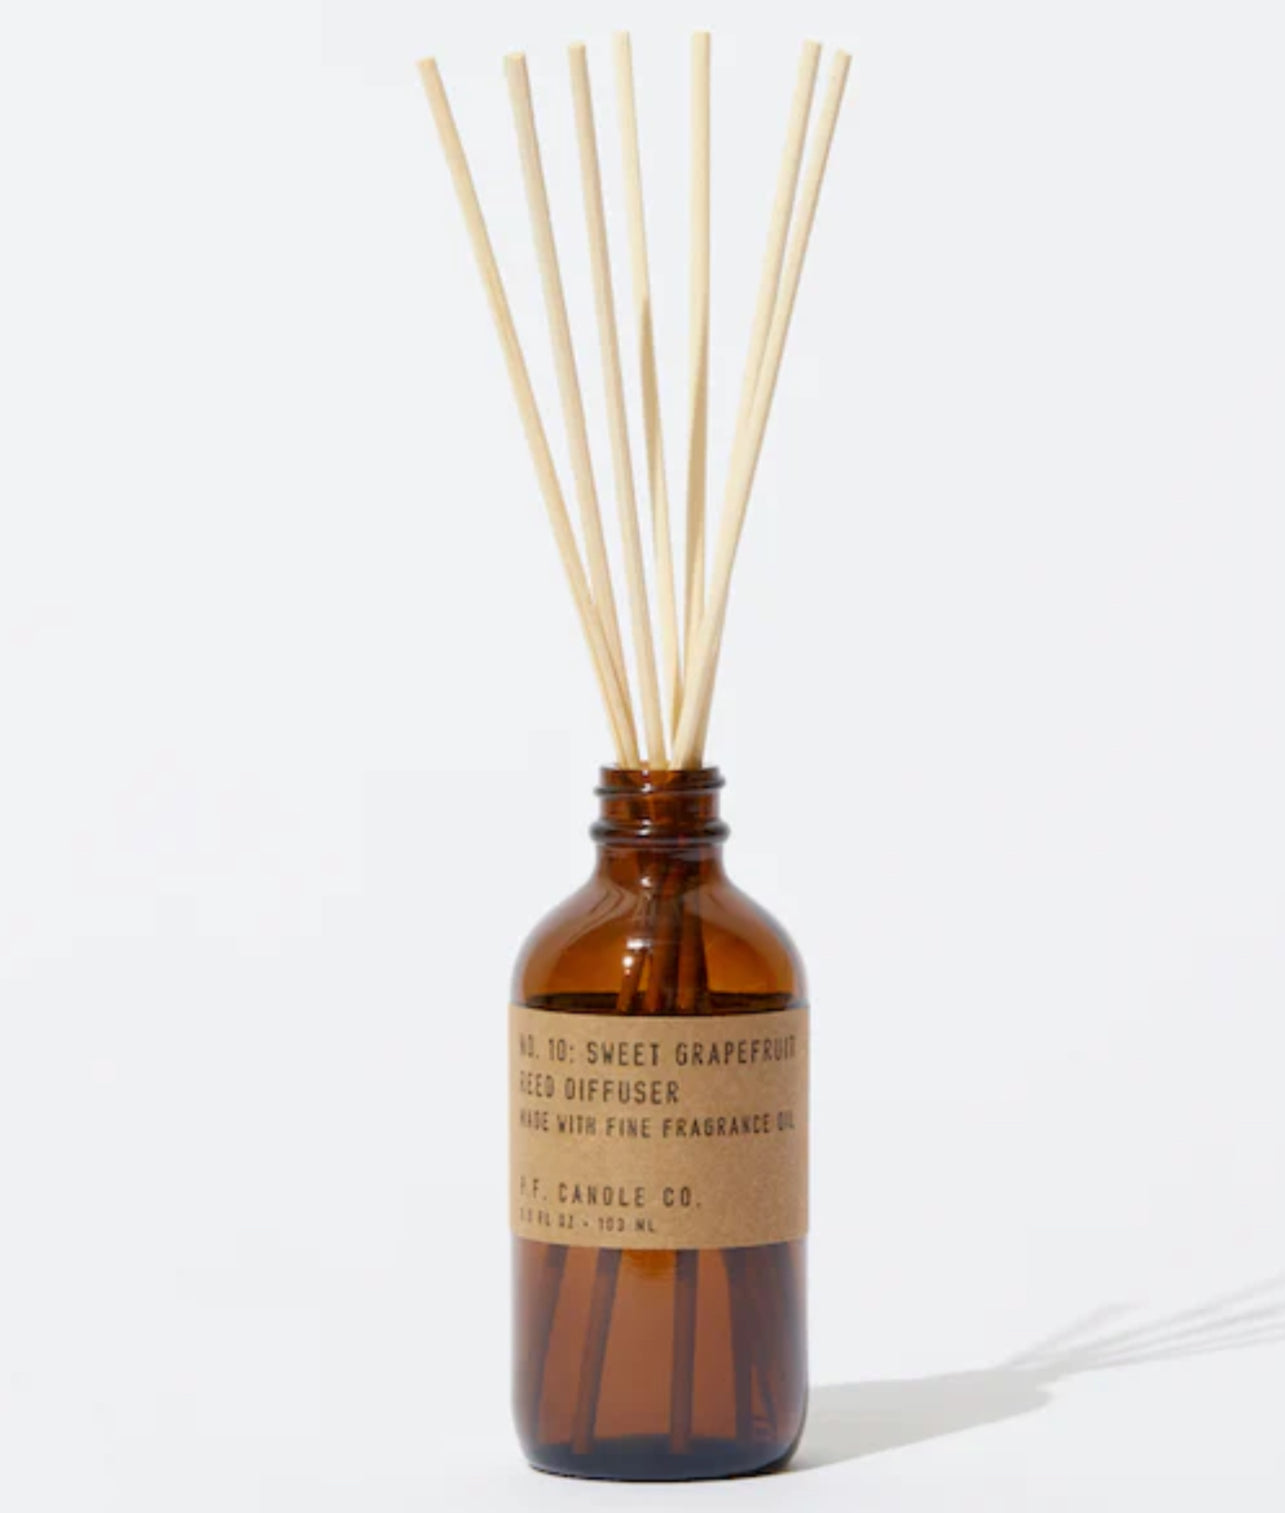 P.F Candle Co. Reed Diffuser